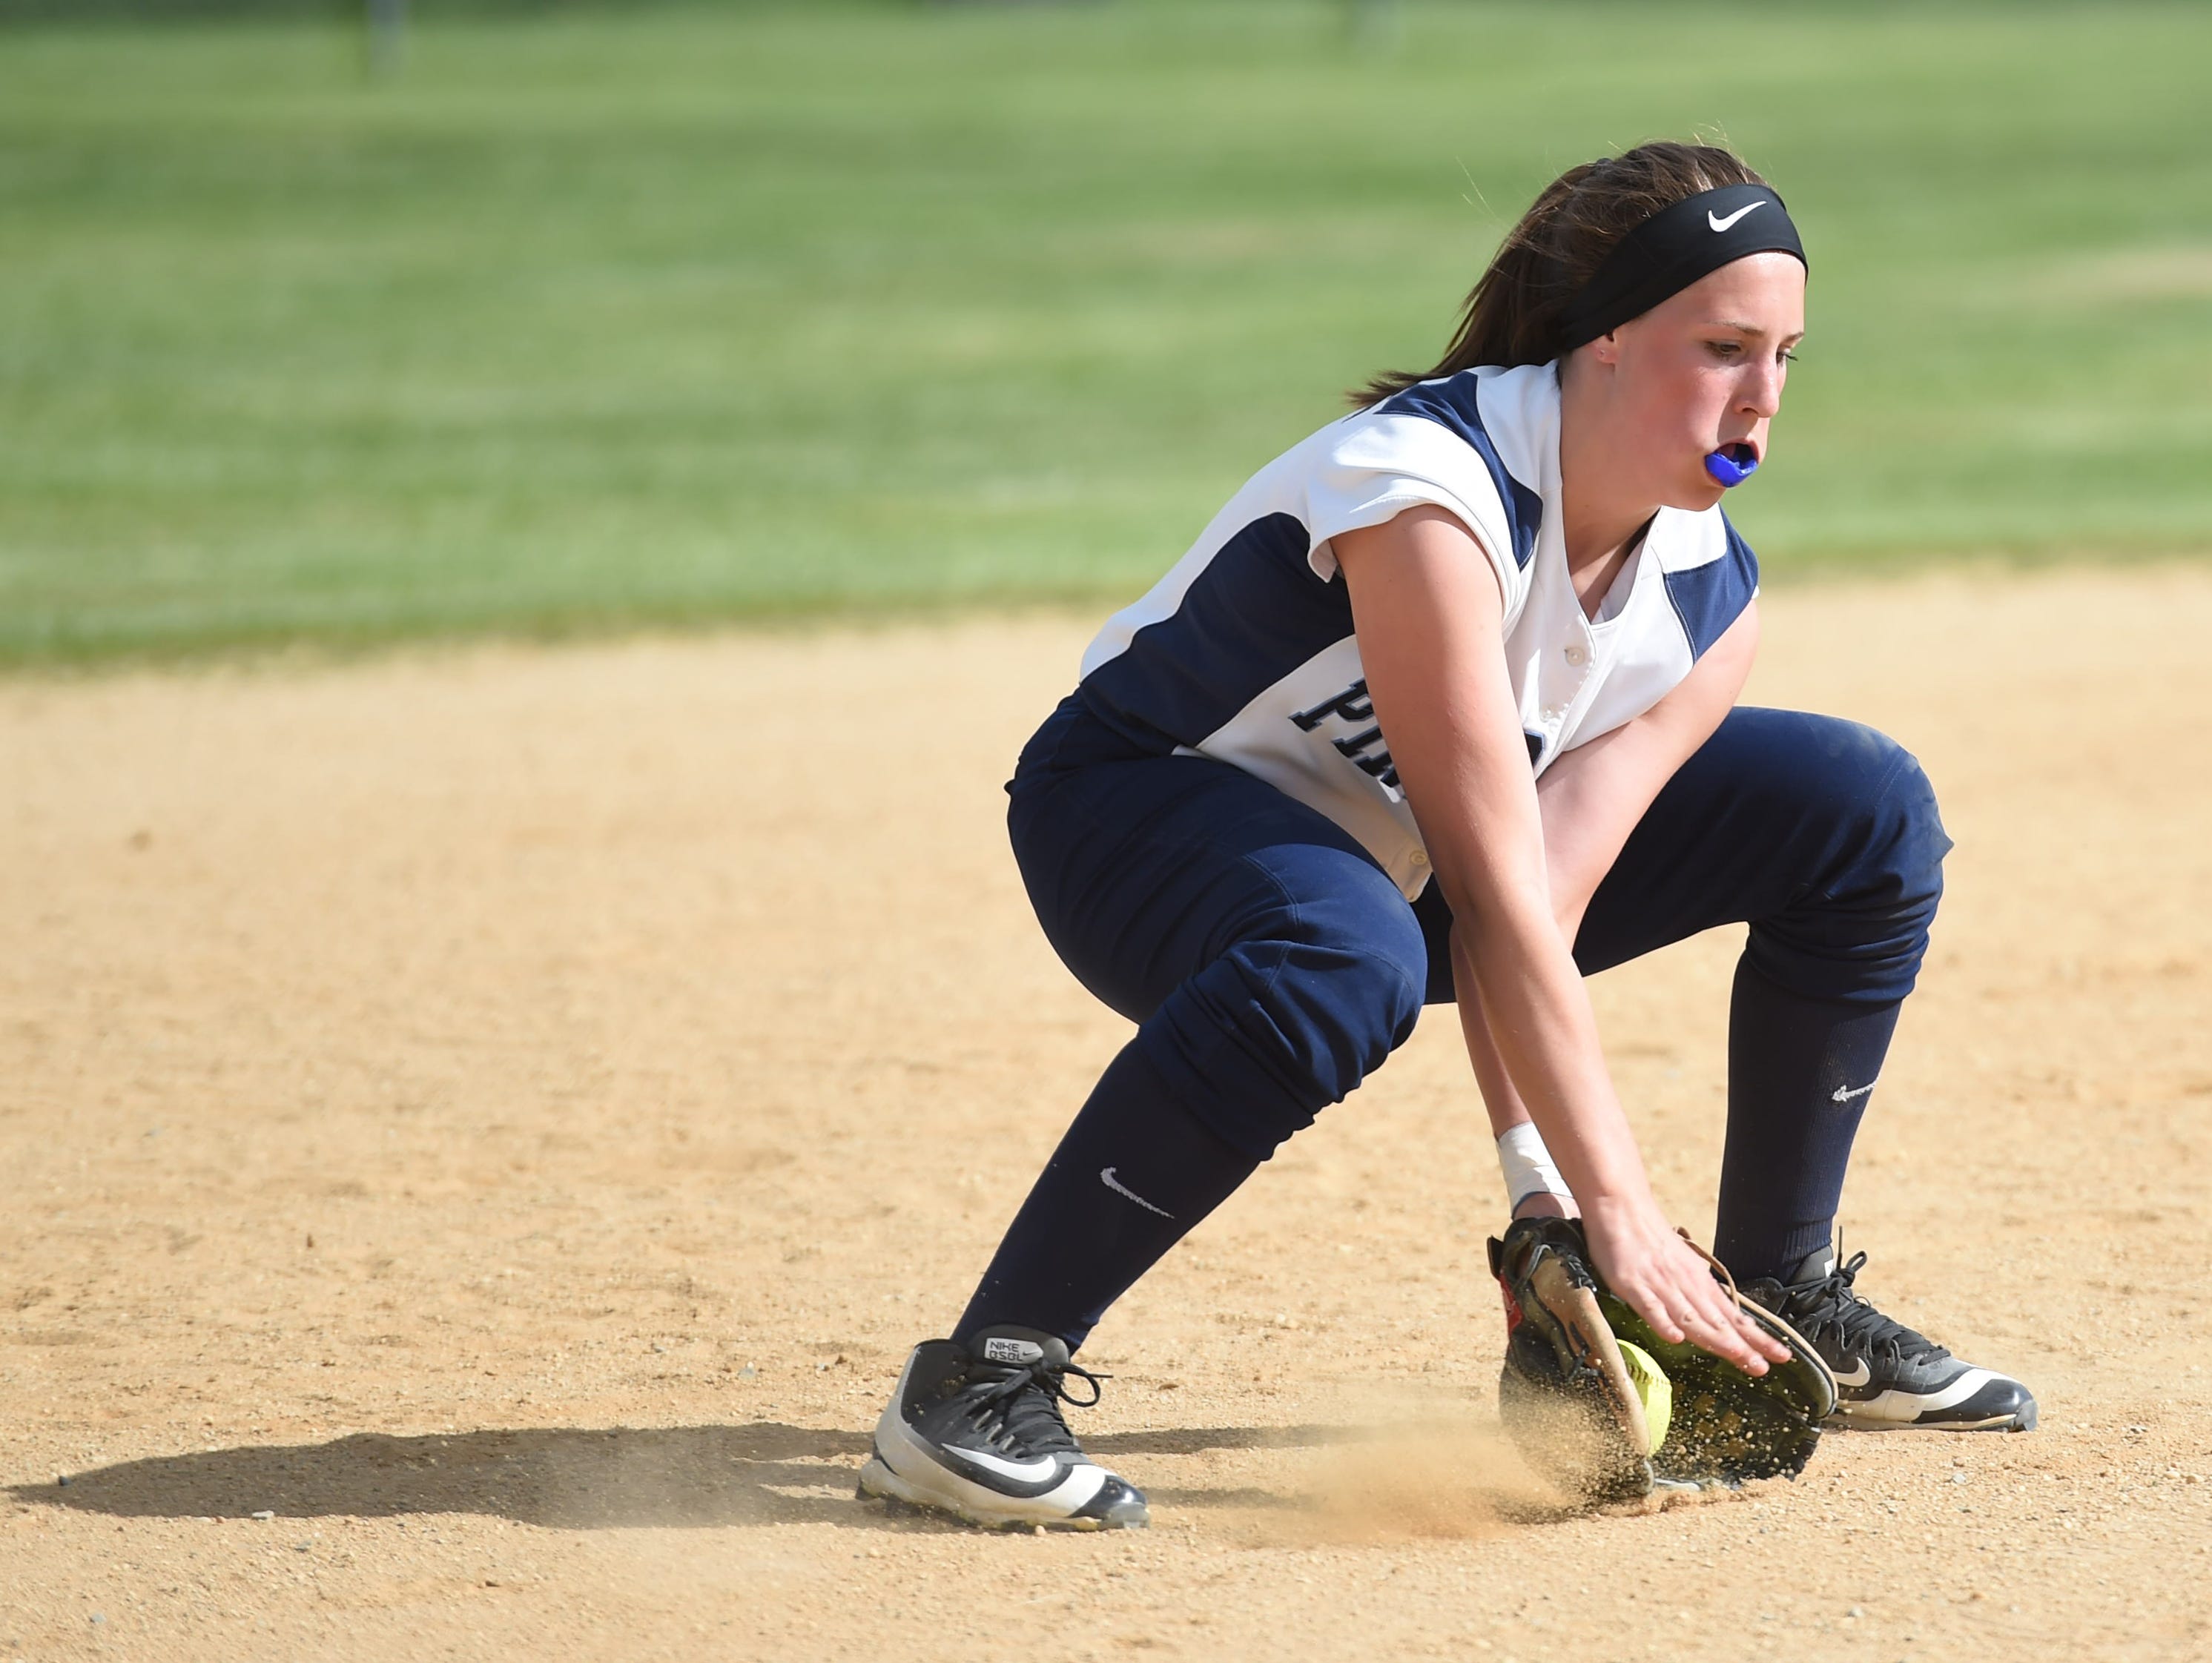 Action from Thursday's MHAL championship between Marlboro and Pine Plains.